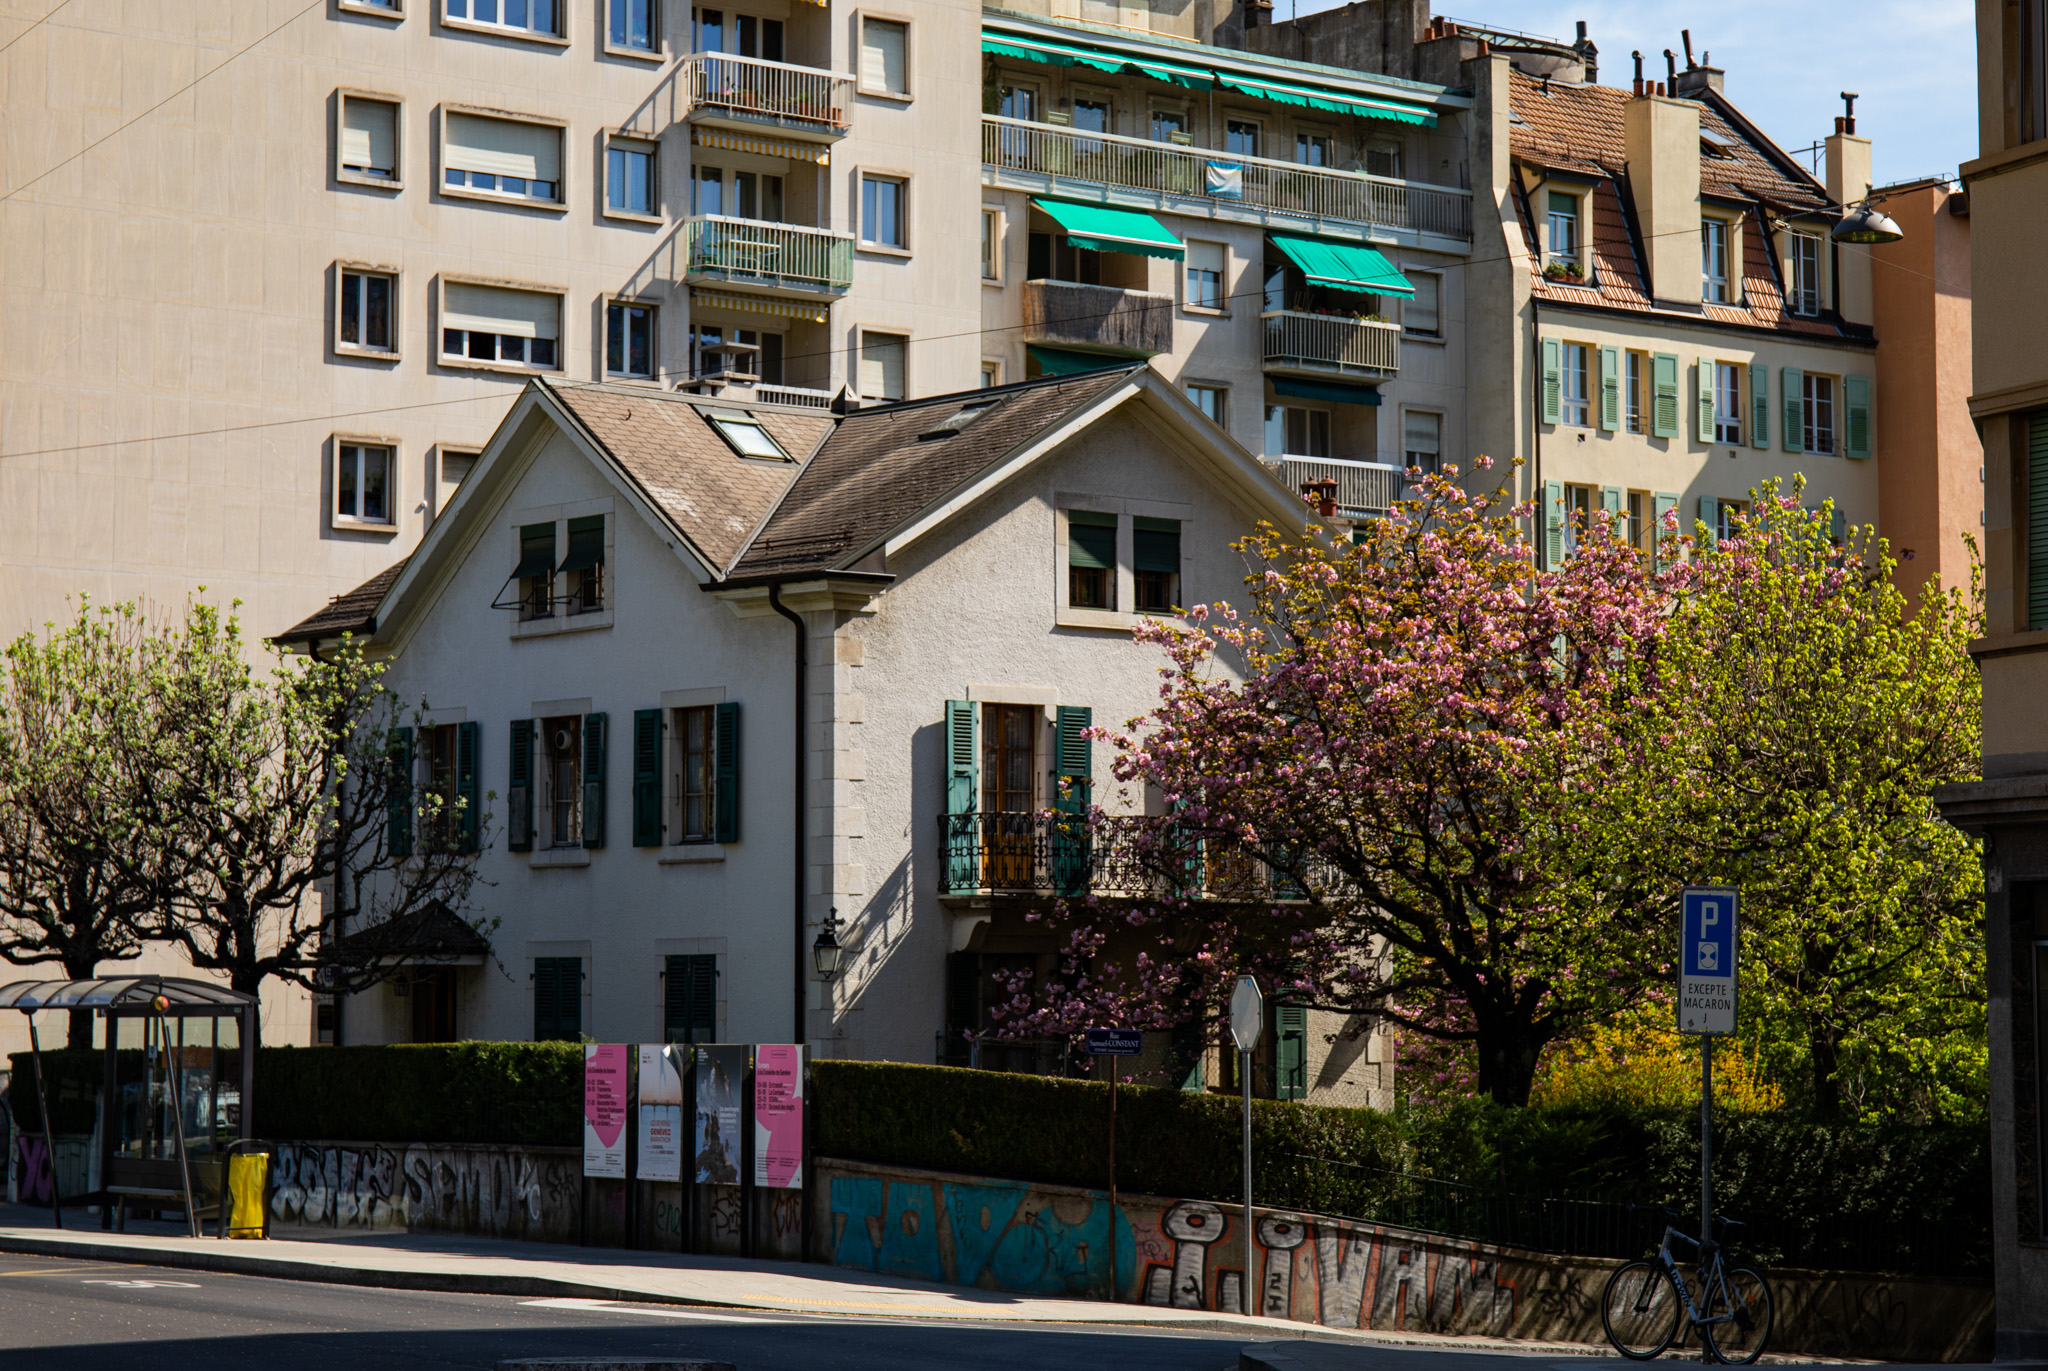 General 2048x1371 photography outdoors nature trees building urban cherry blossom house architecture road city sunlight Geneva